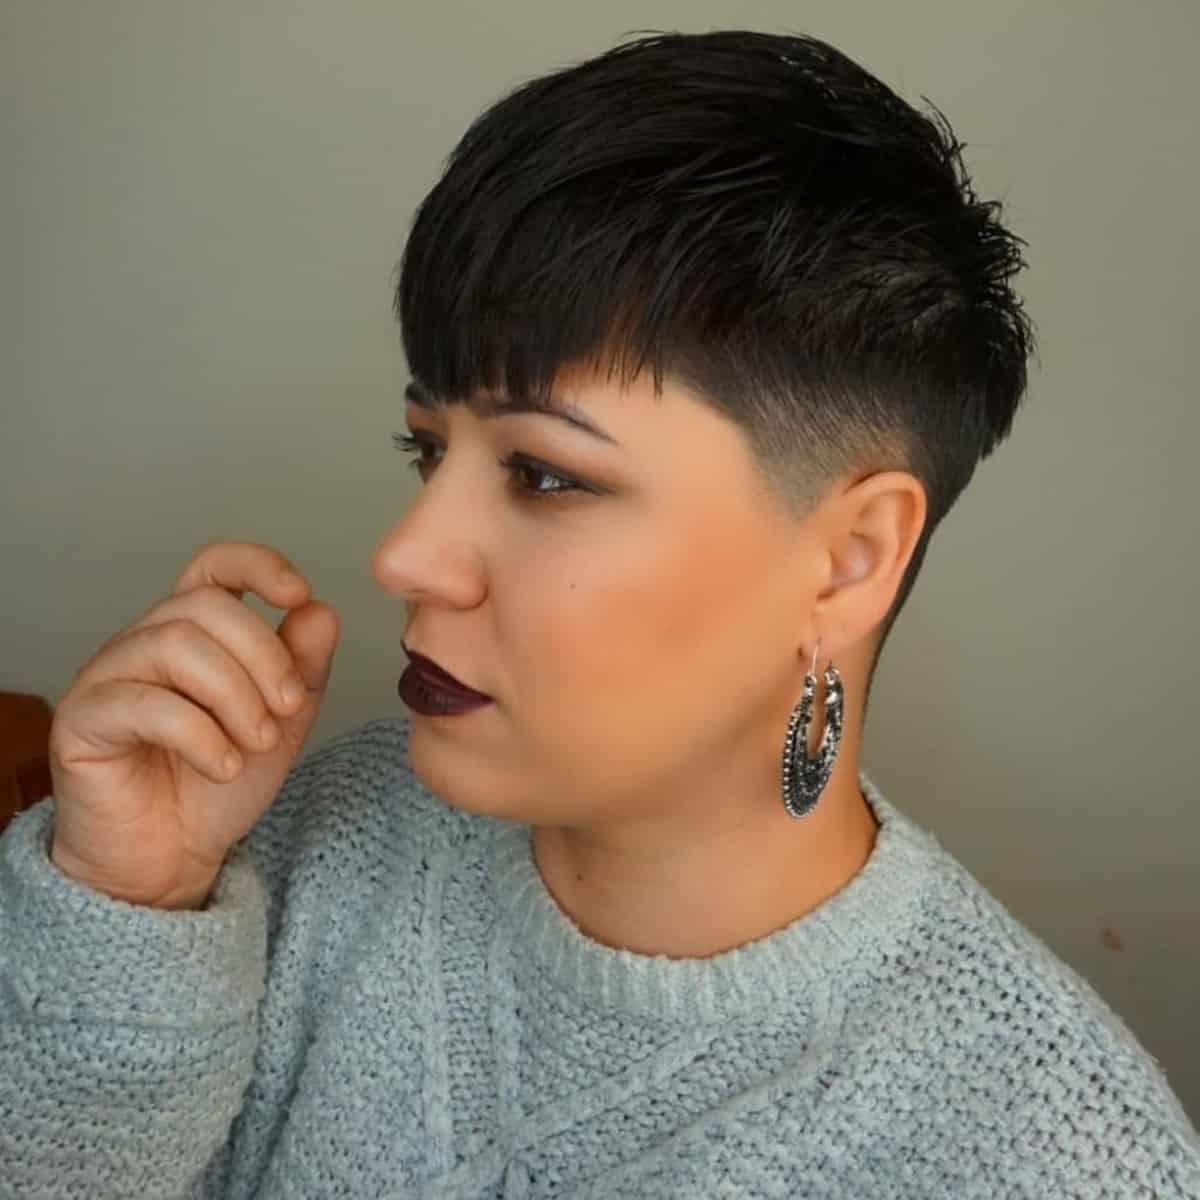 Undercut Bowl Hairstyle for Women